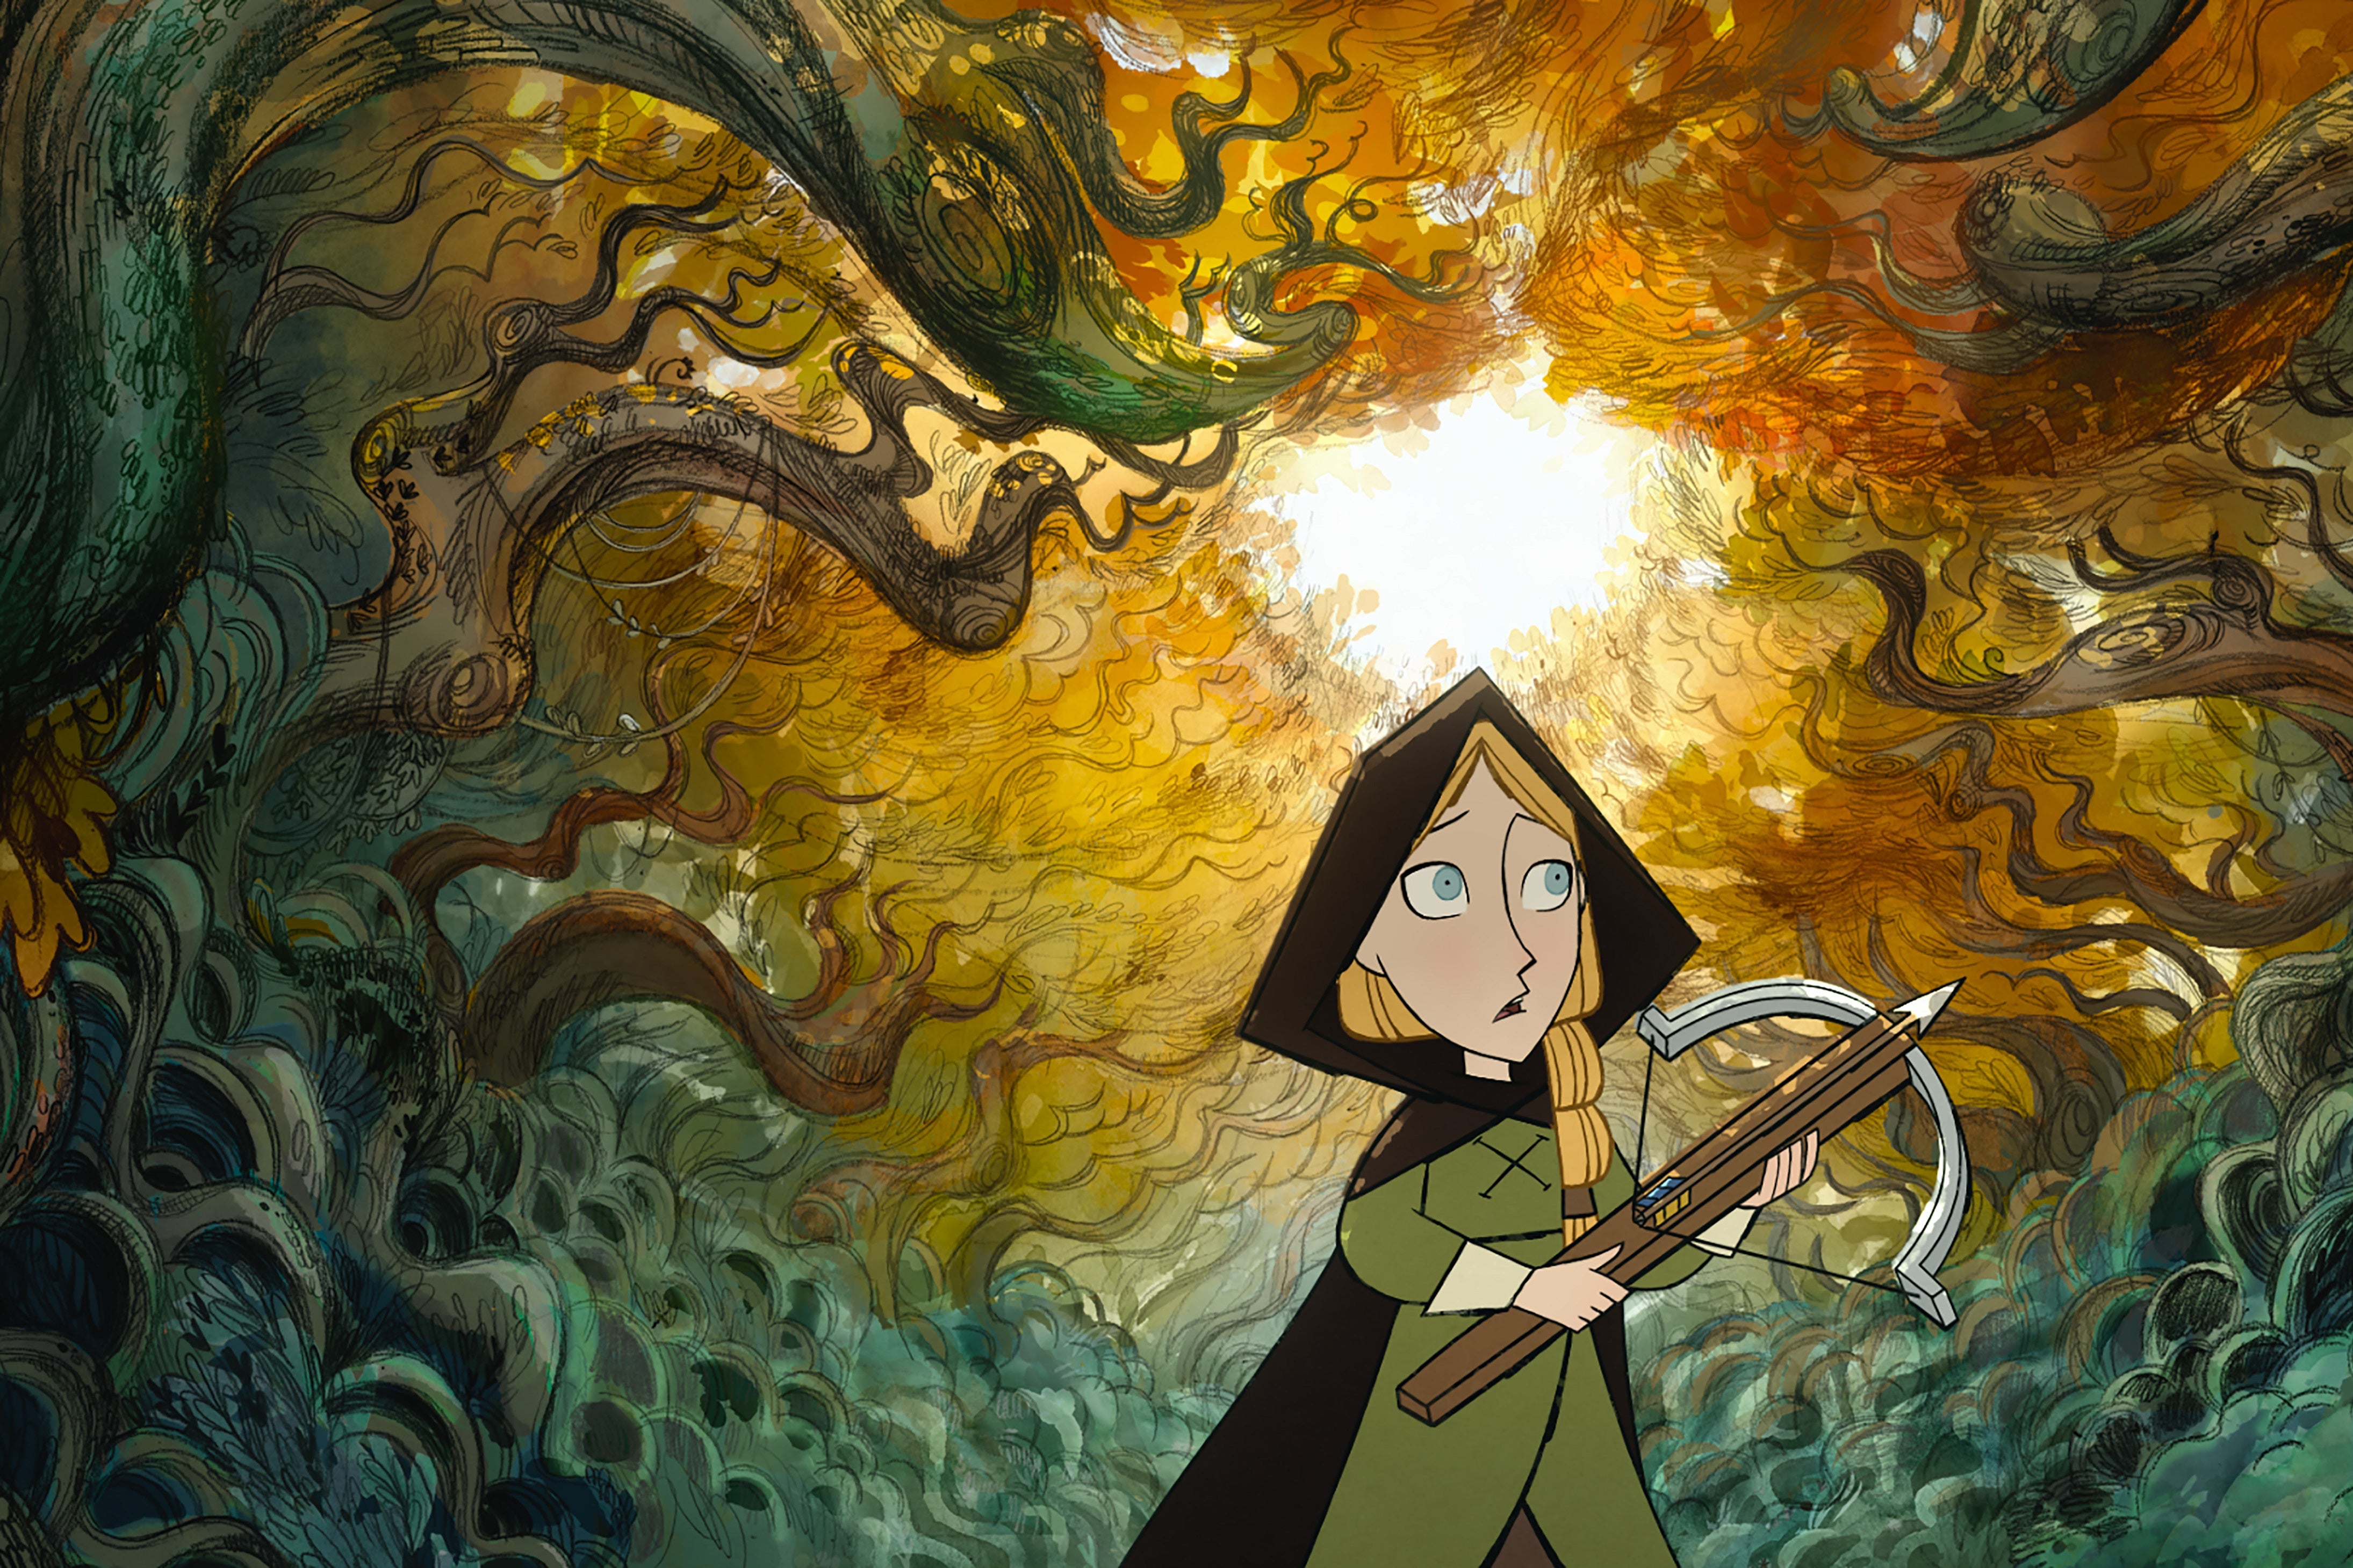 A young woman with a crossbow navigates a forbidding Irish forest.